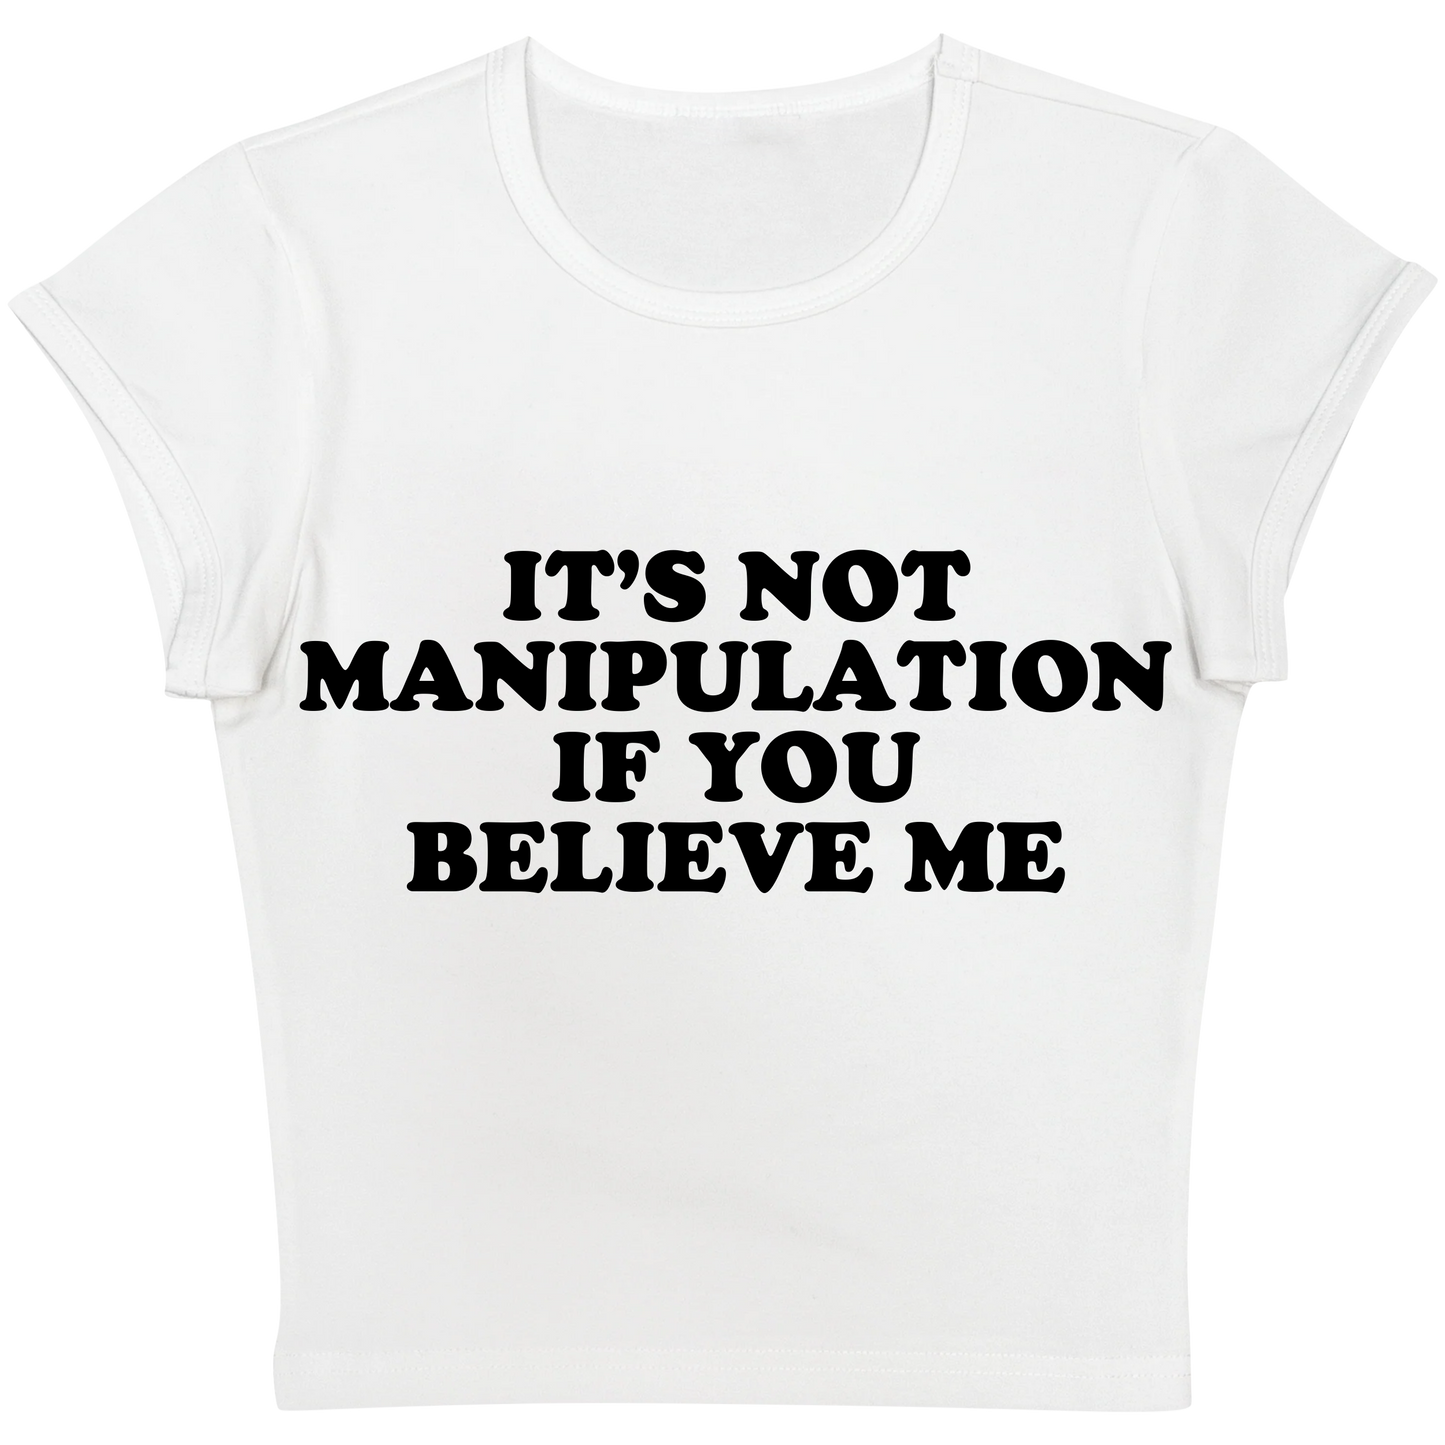 It's Not Manipulation If You Believe Me Baby tee